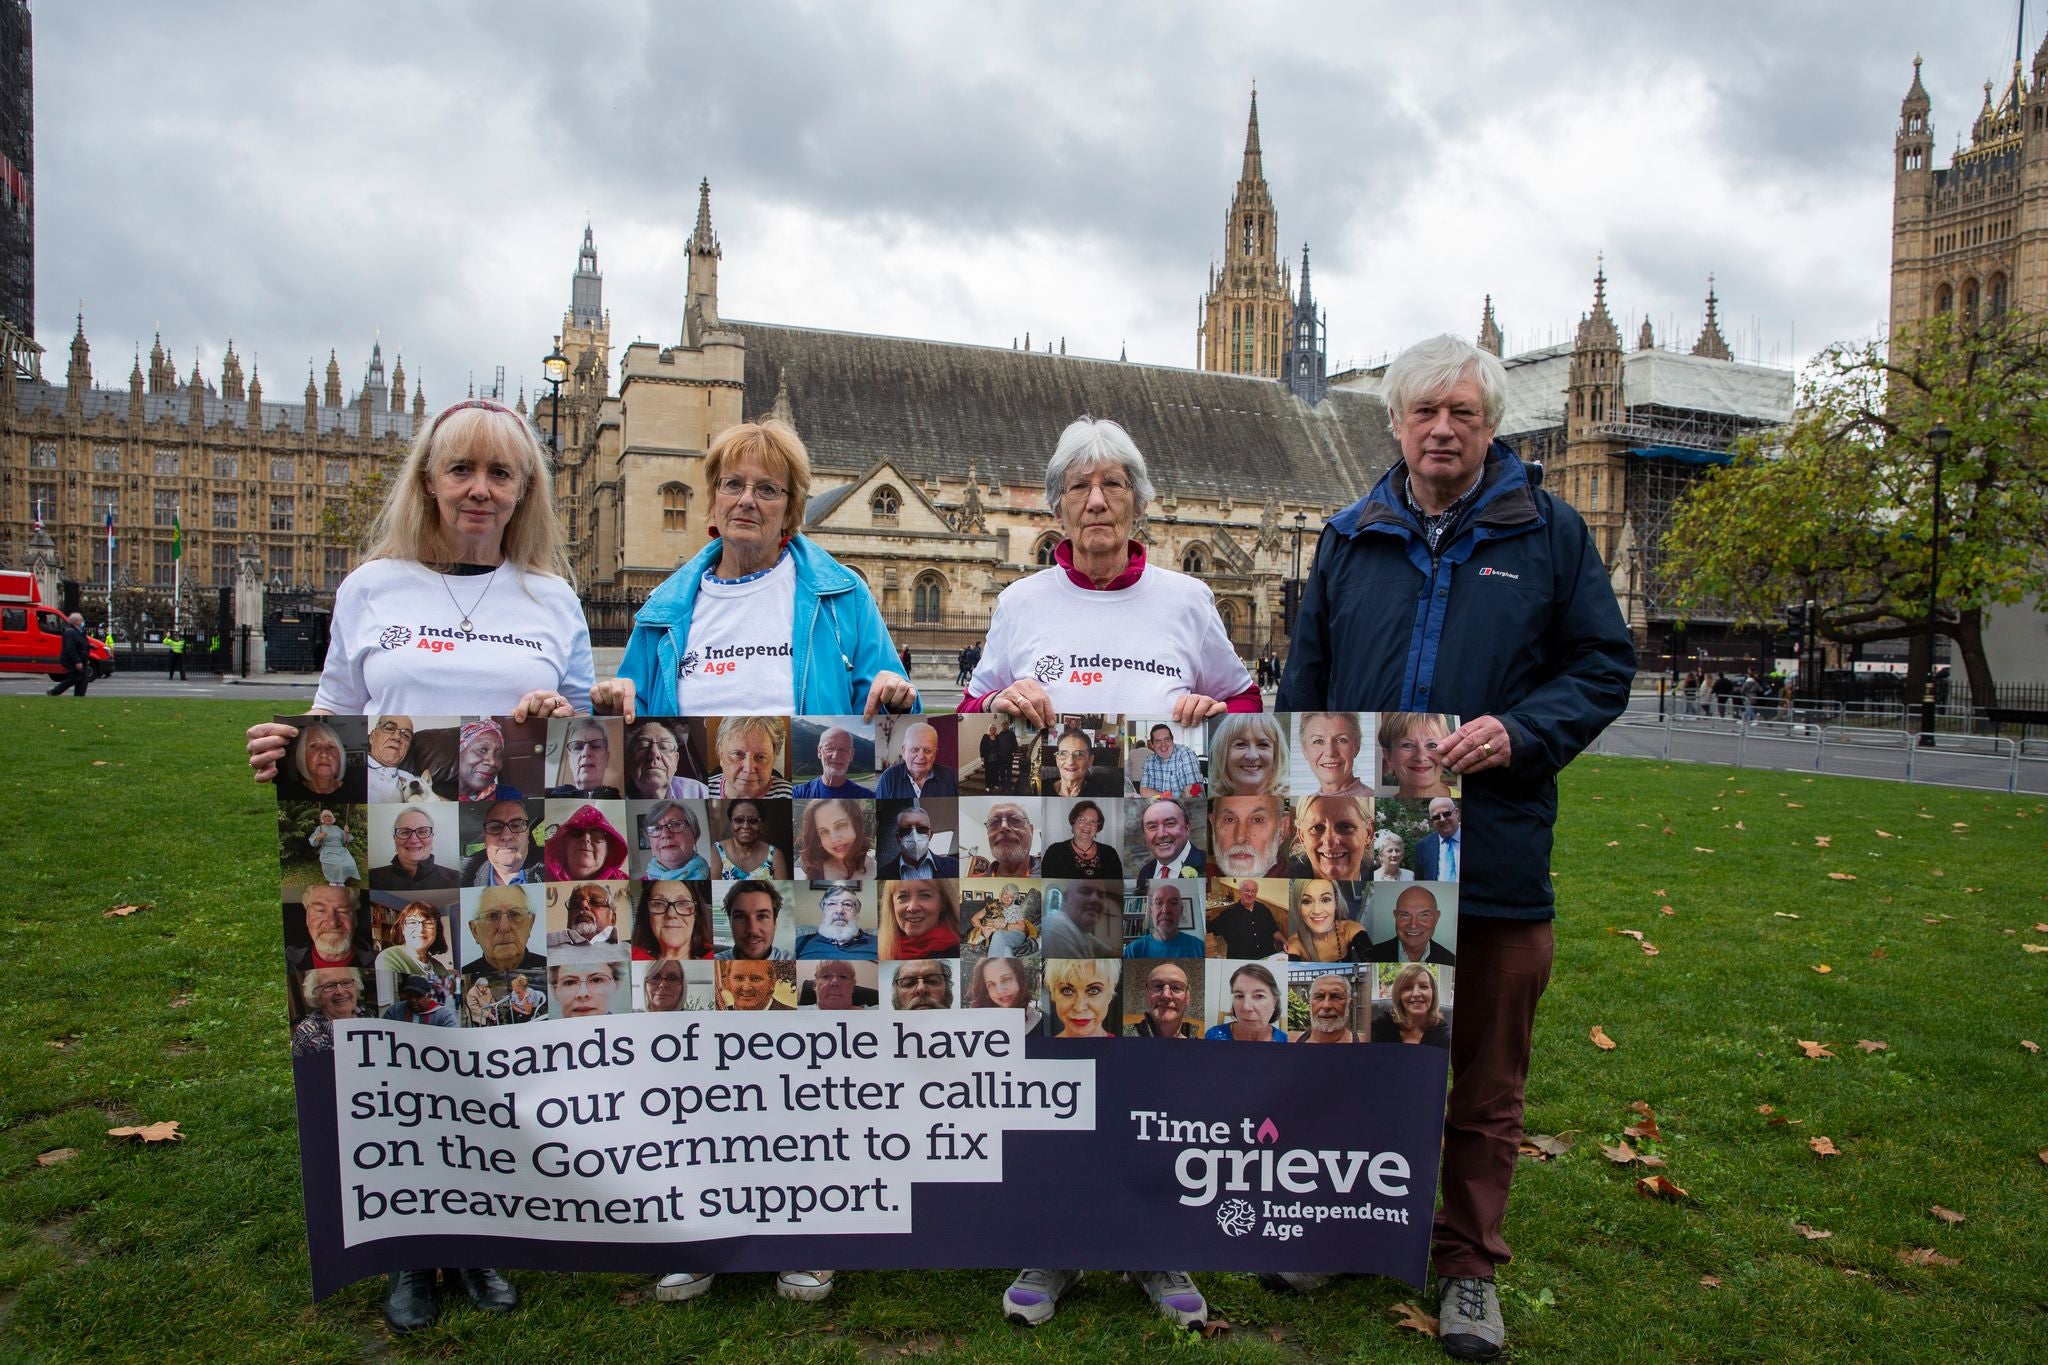 Pictured are Paul, Julie, Kathleen and Michaele with a banner featuring some of the people who signed the open letter.